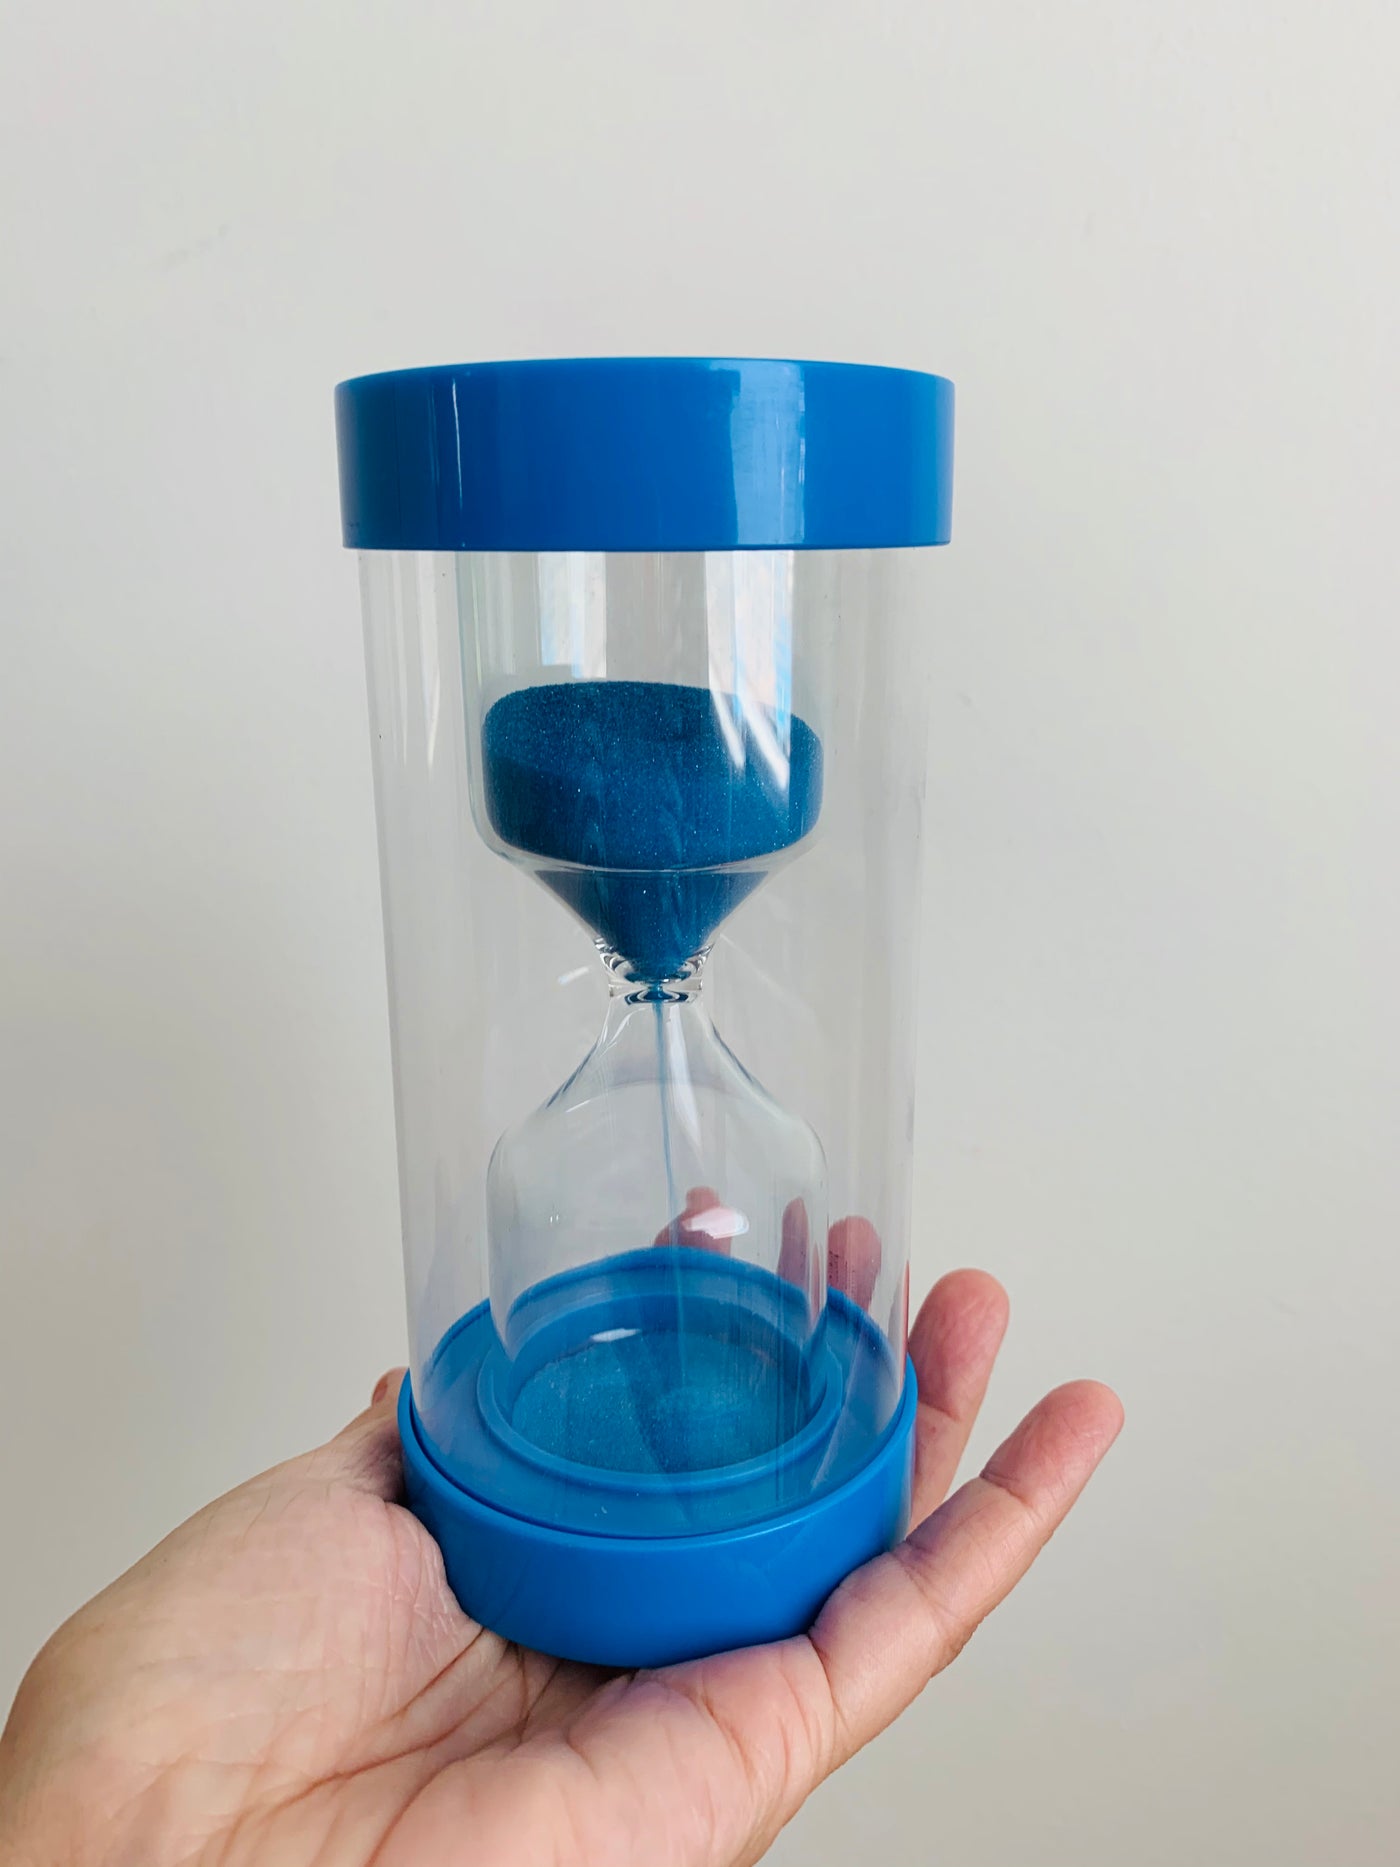 Large hourglass, 5 minutes 